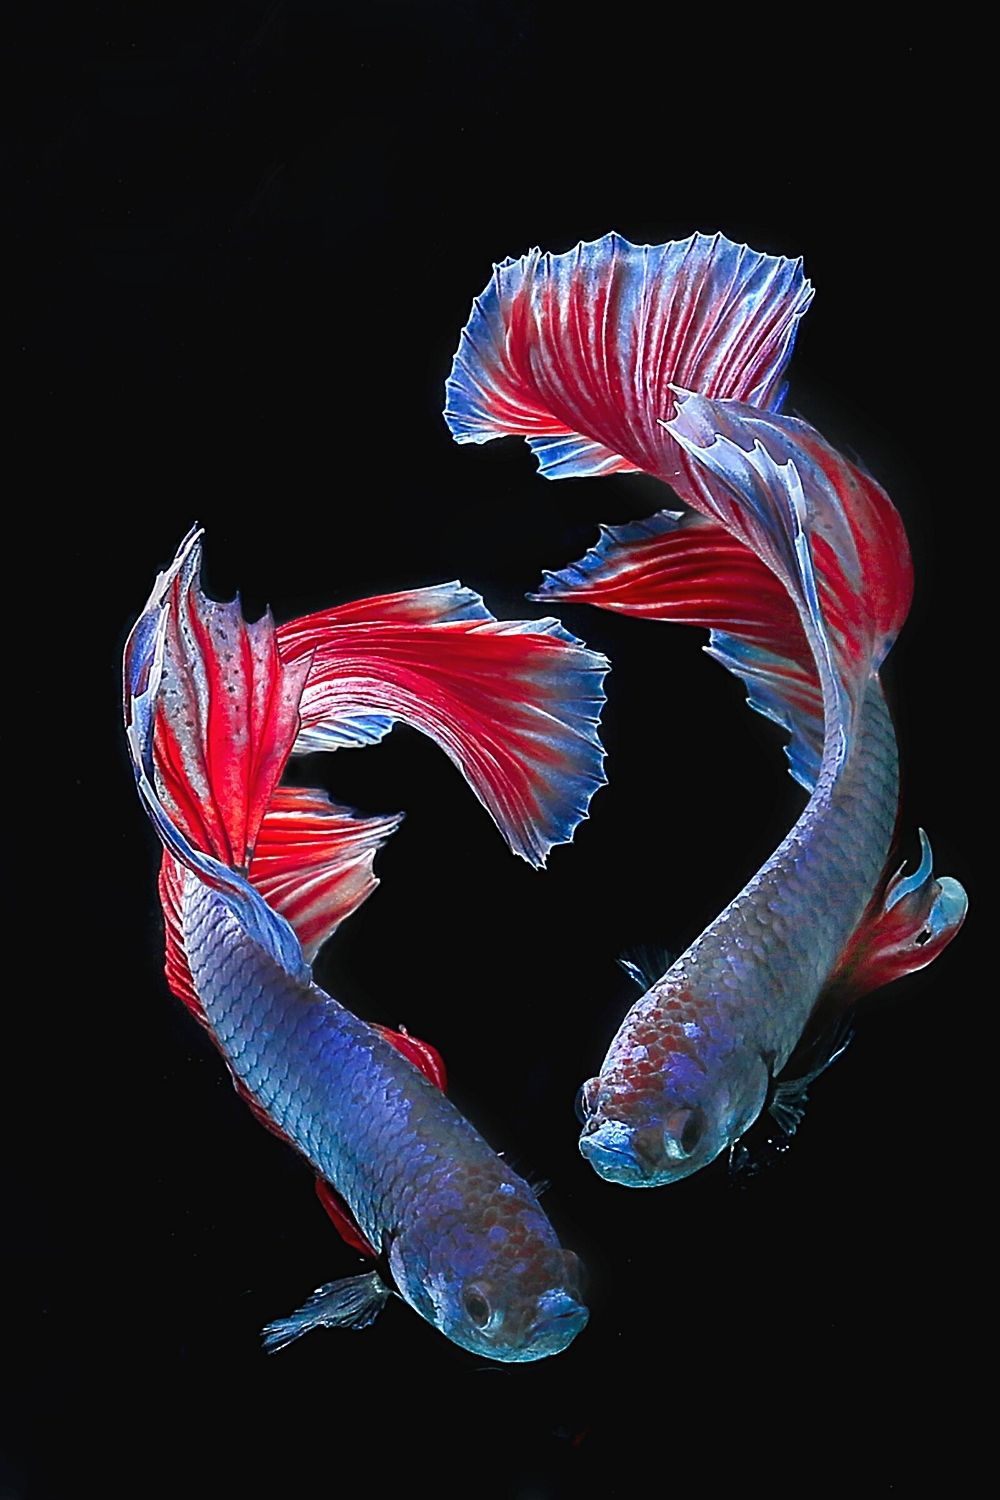 If you're breeding your betta fish, make sure to choose those that are healthy, energetic, and are brightly-colored